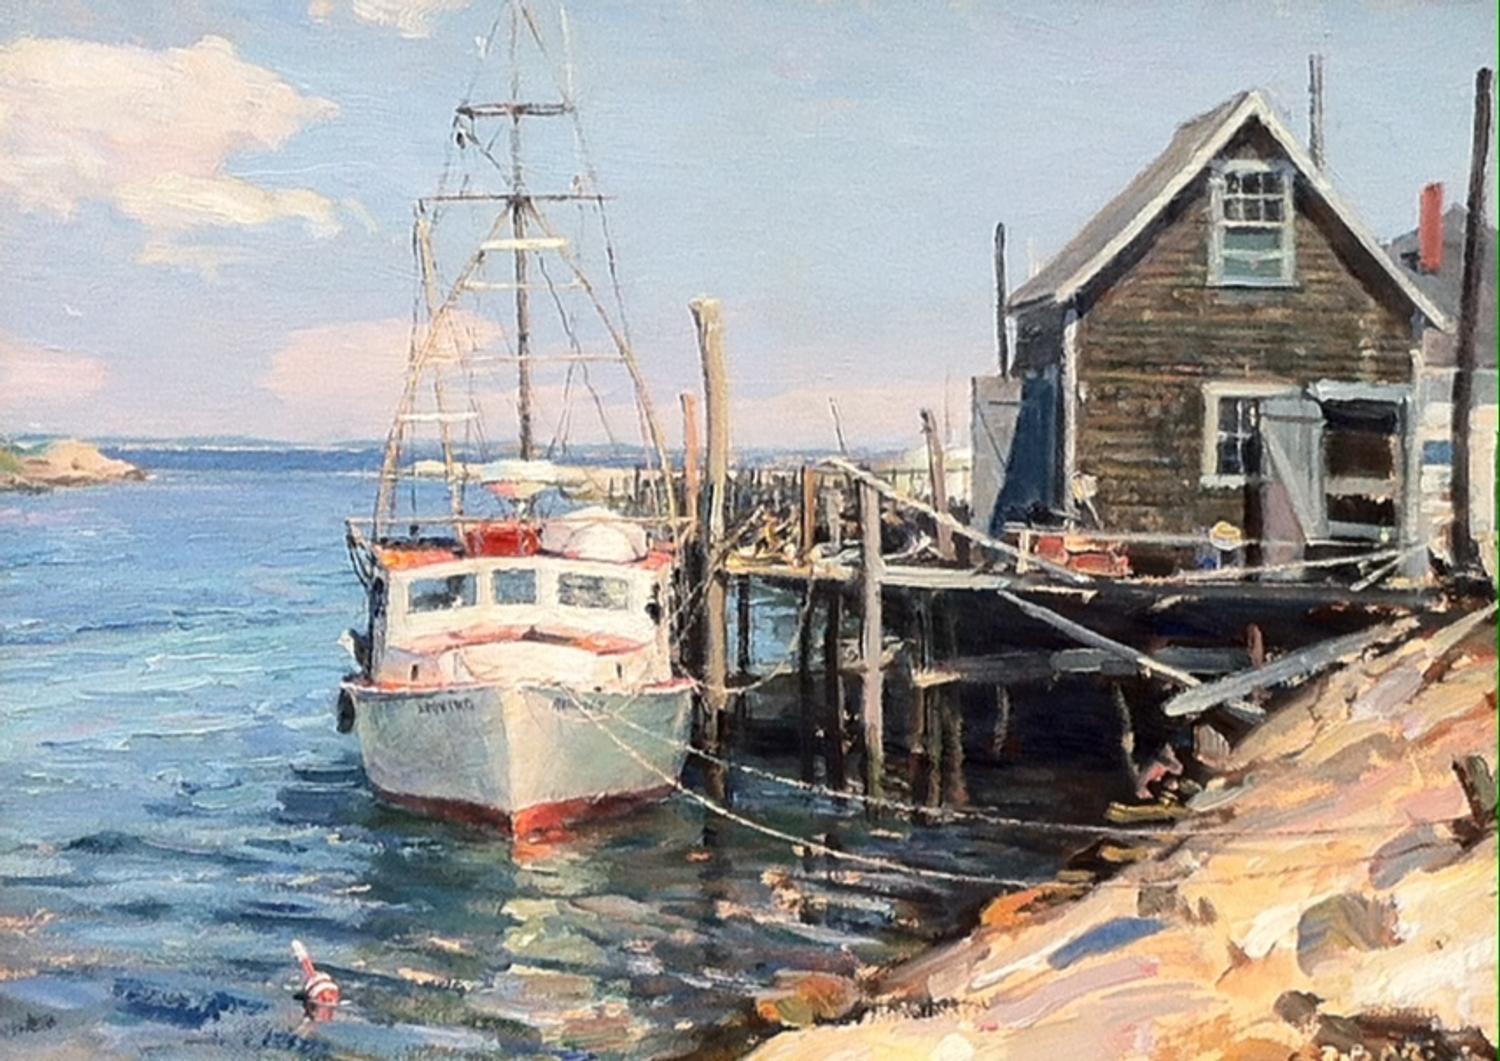 Fall Maritime Art Sale and Exhibition - Artwire Press Release from